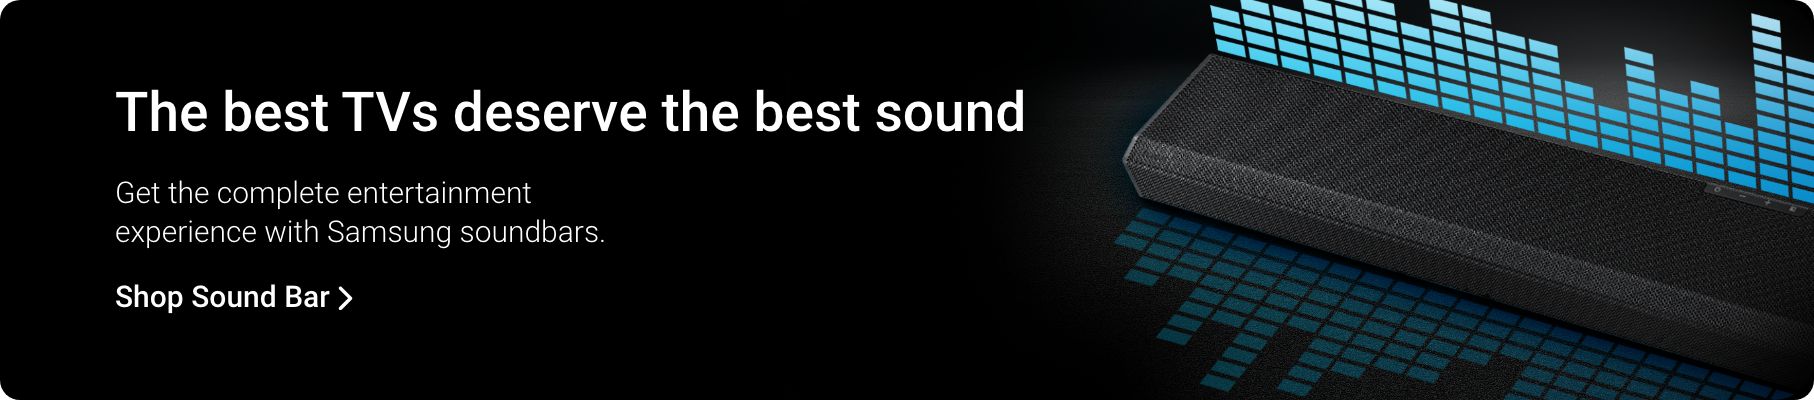 The best TVs deserve thee best sound. Gete the complete entertainment experience with Samsung soundbars. Shop sound bar